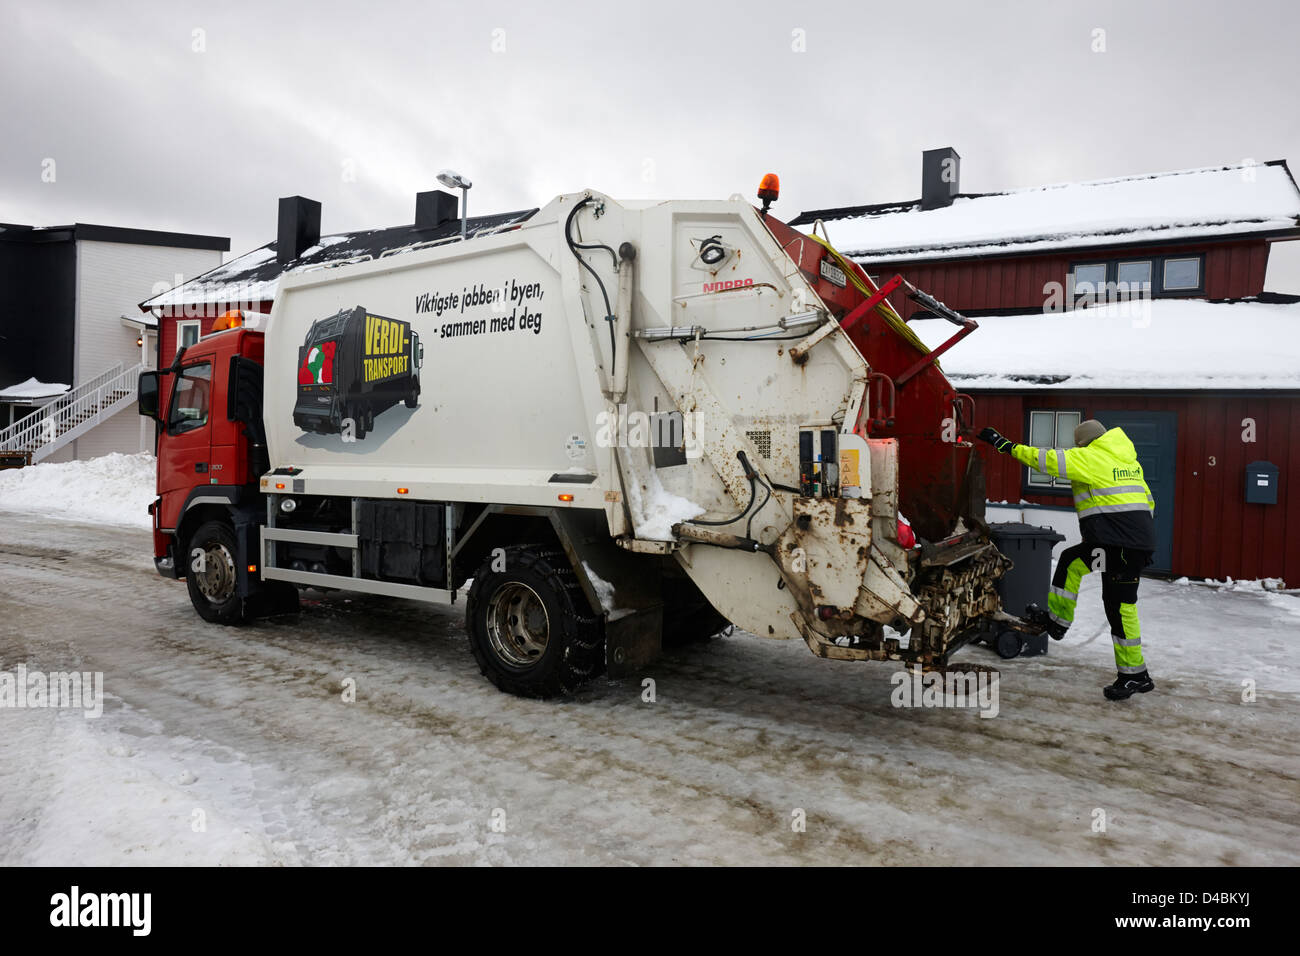 refuse collection during winter Honningsvag finnmark norway europe Stock Photo